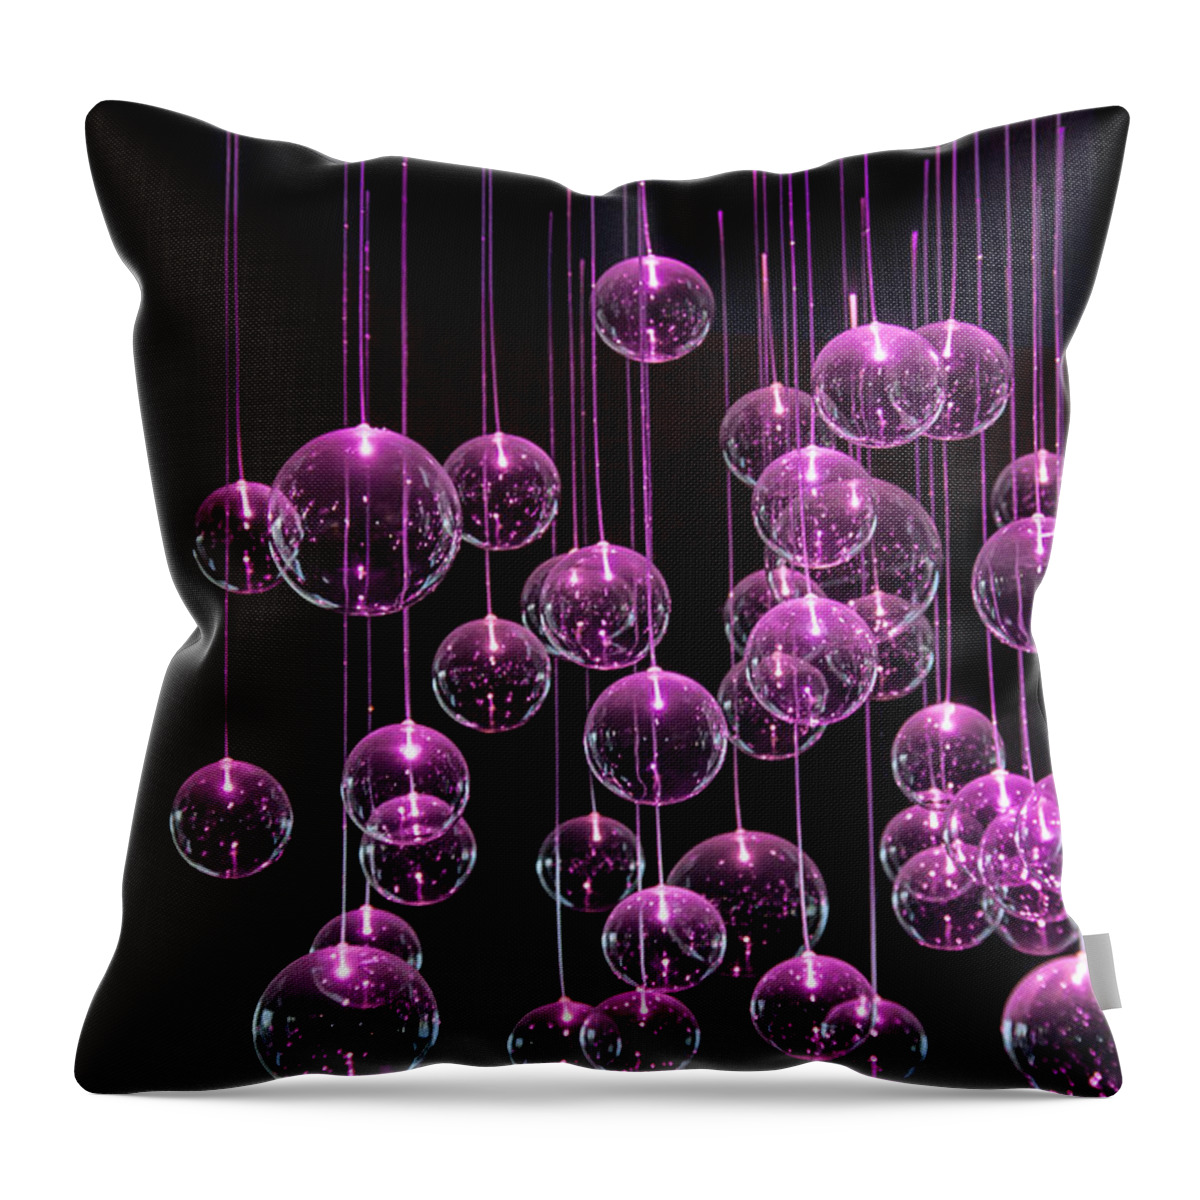 Lights Throw Pillow featuring the photograph Neon Nights by Evelina Kremsdorf